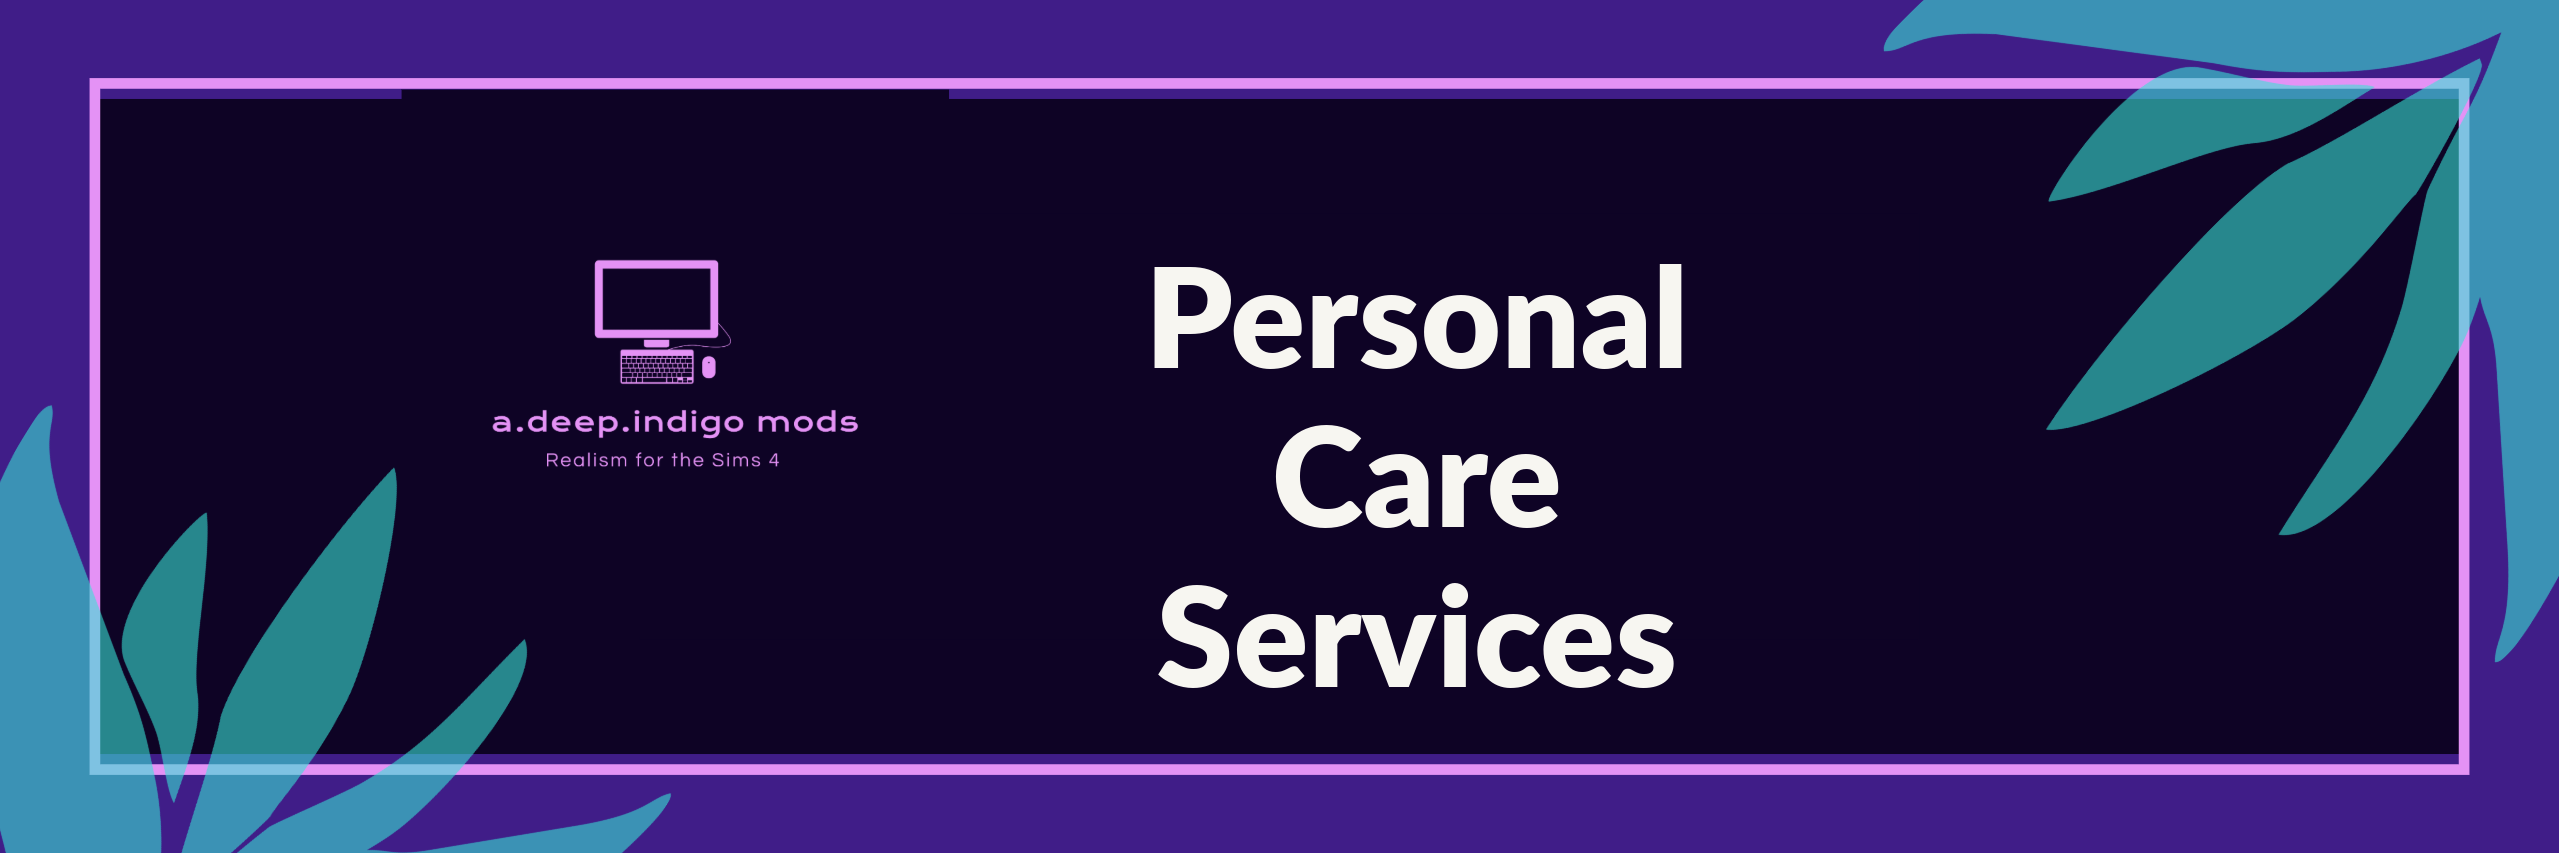 Personal Care Services